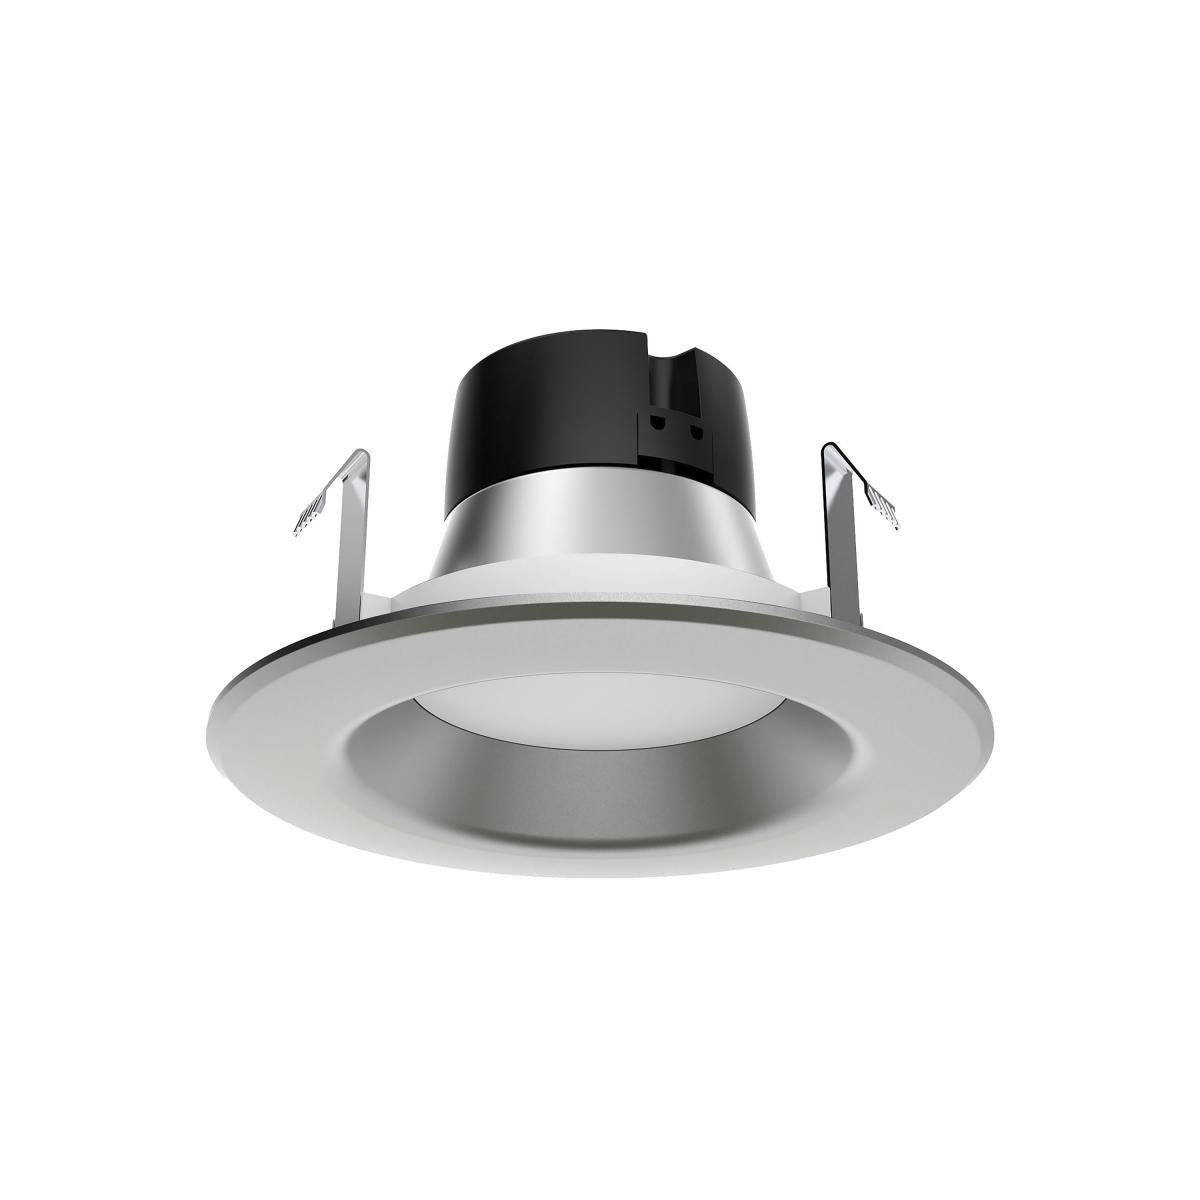 Replacement for Satco S39744 8.5 watt LED Downlight Retrofit 4" 3000K 120 volts Dimmable Brushed Nickel Finish - NOW S11833